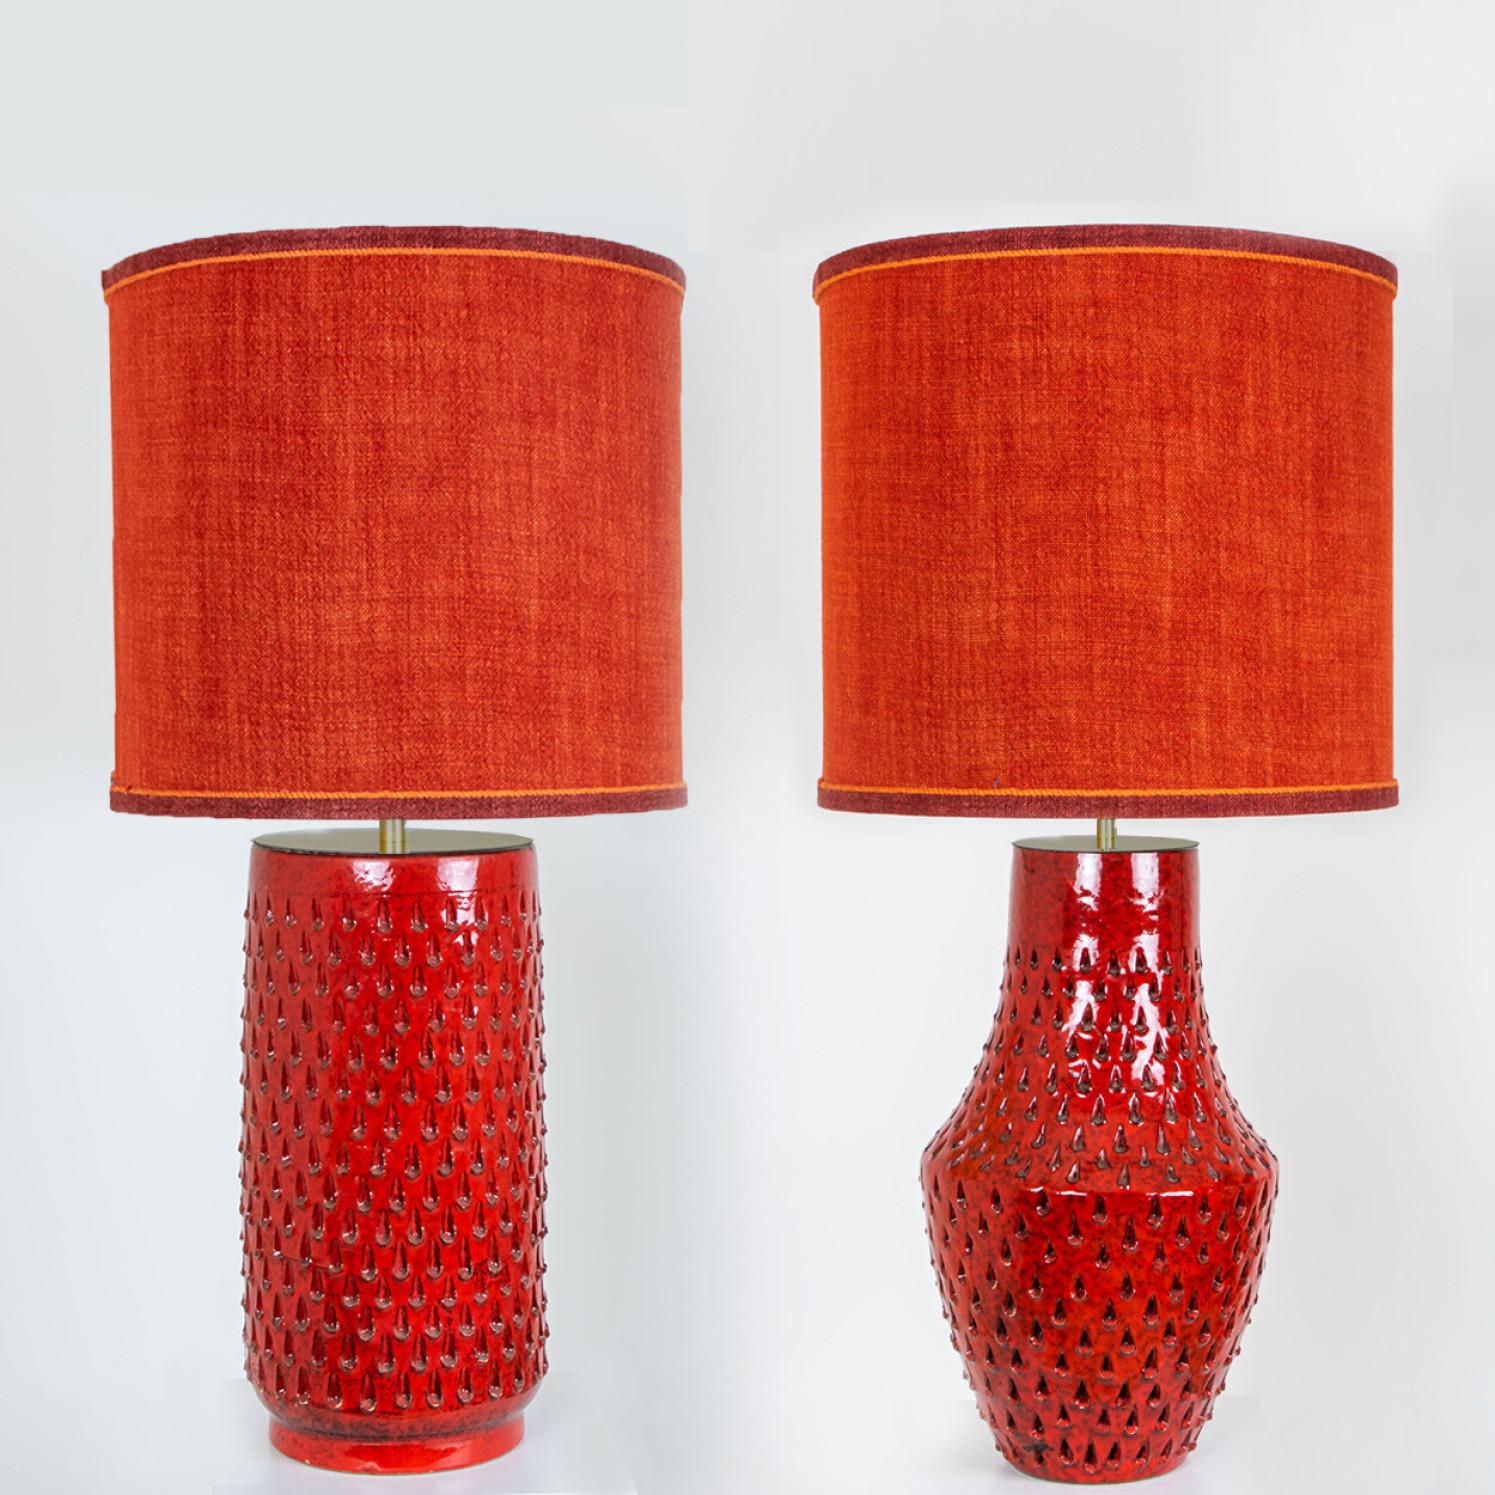 Fratelli Fanciullacci Ceramic Table Lamp with New Custom Made Lampshade, 1970 For Sale 12